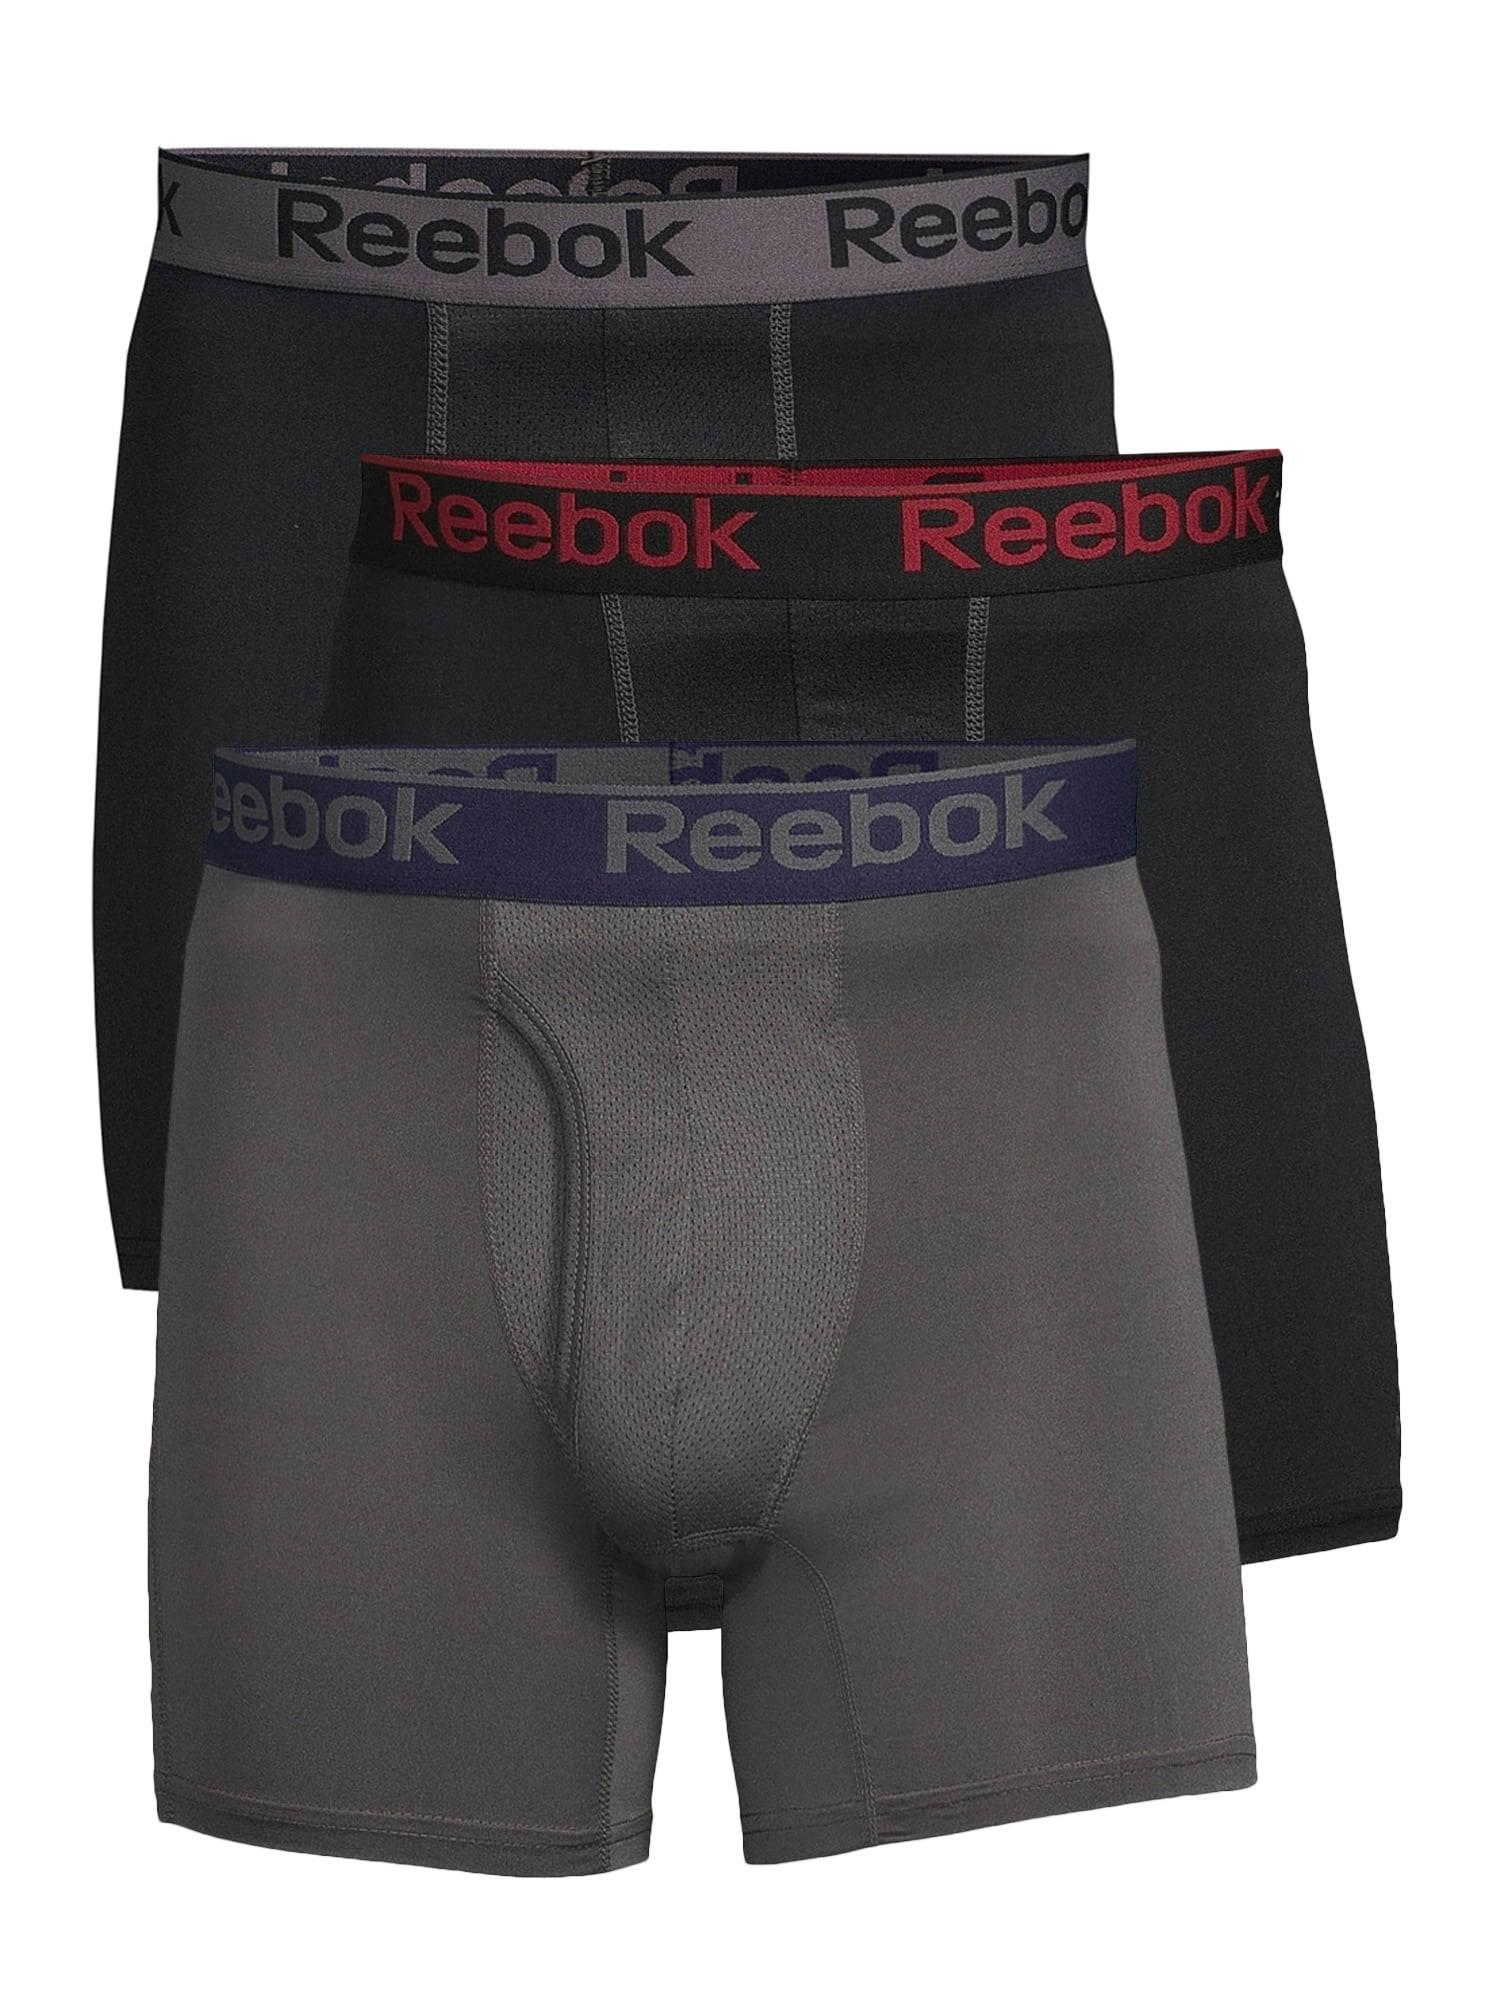 Reebok Synthetic Sport Soft Performance Boxer in Black for Men Mens Clothing Underwear Boxers 